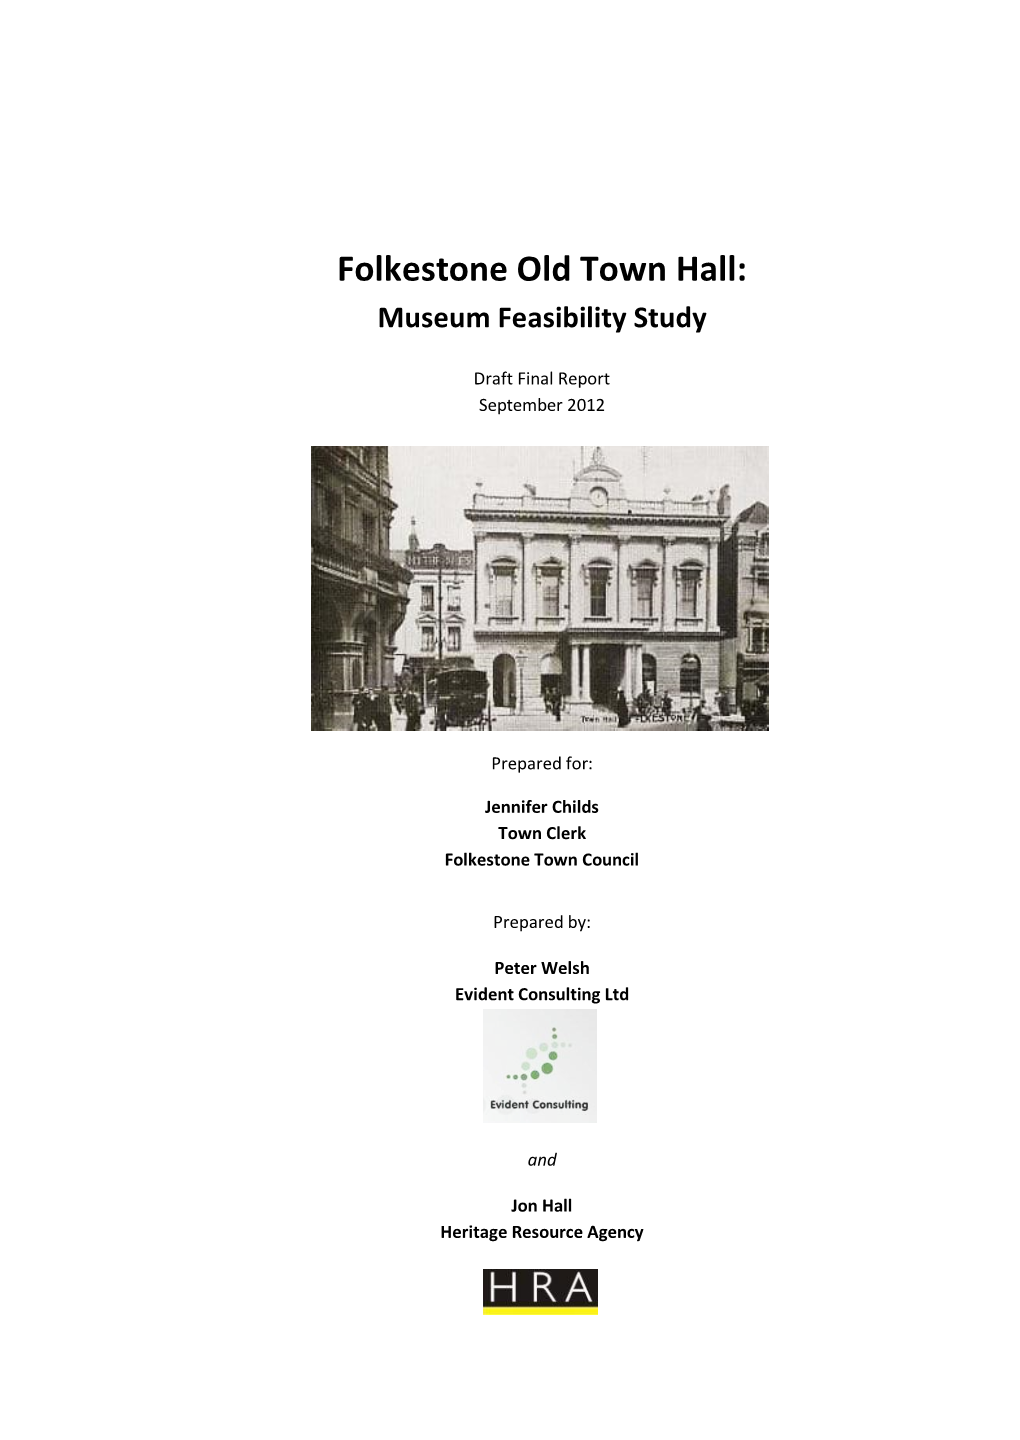 Folkestone Old Town Hall: Museum Feasibility Study